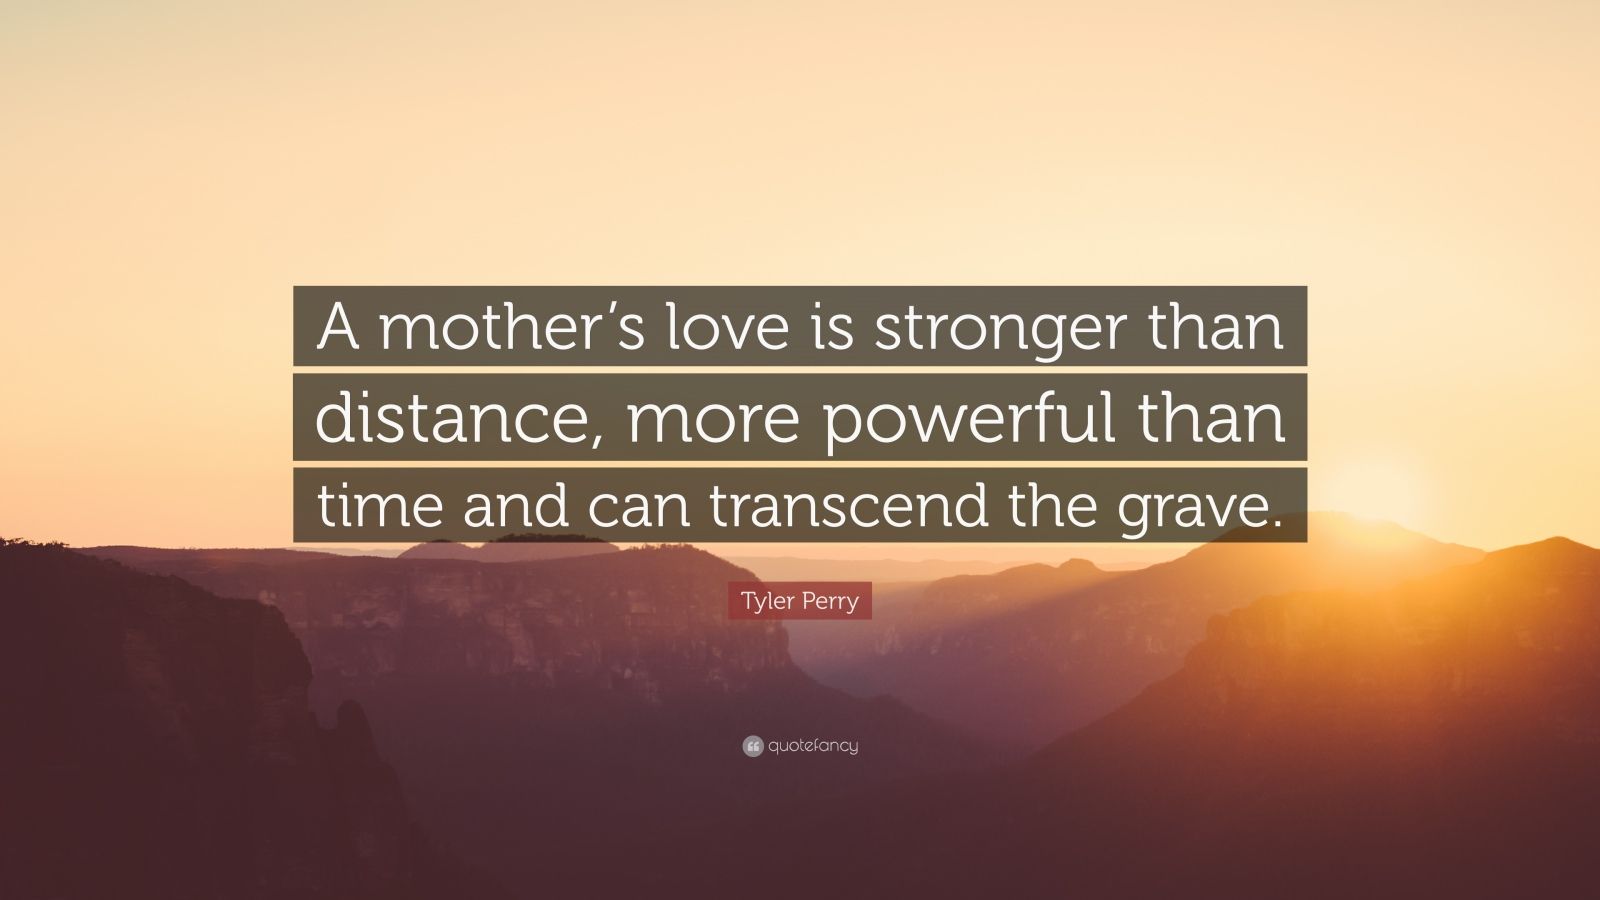 Tyler Perry Quote “A mother s love is stronger than distance more powerful than